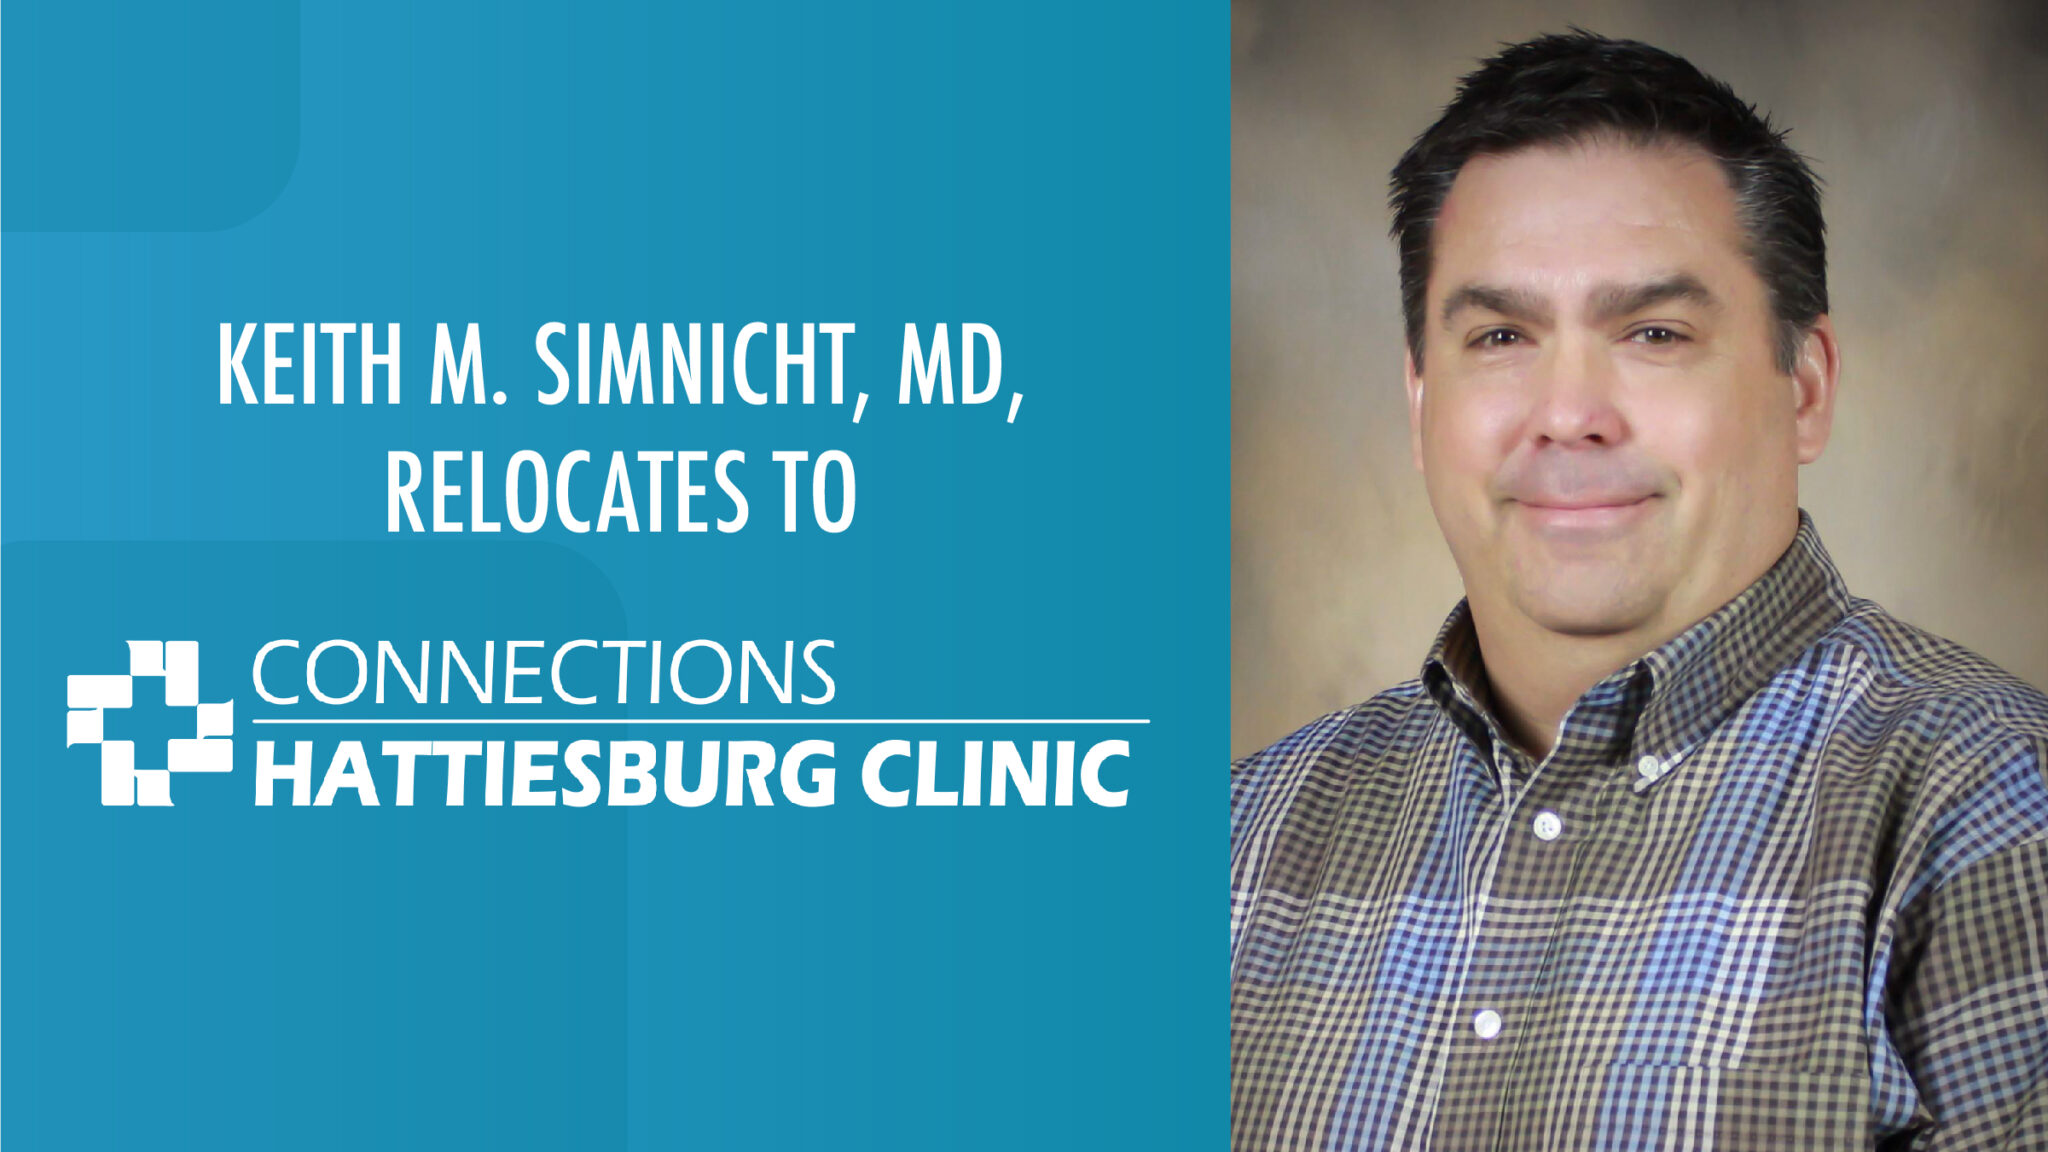 Keith M. Simnicht, MD, Relocates